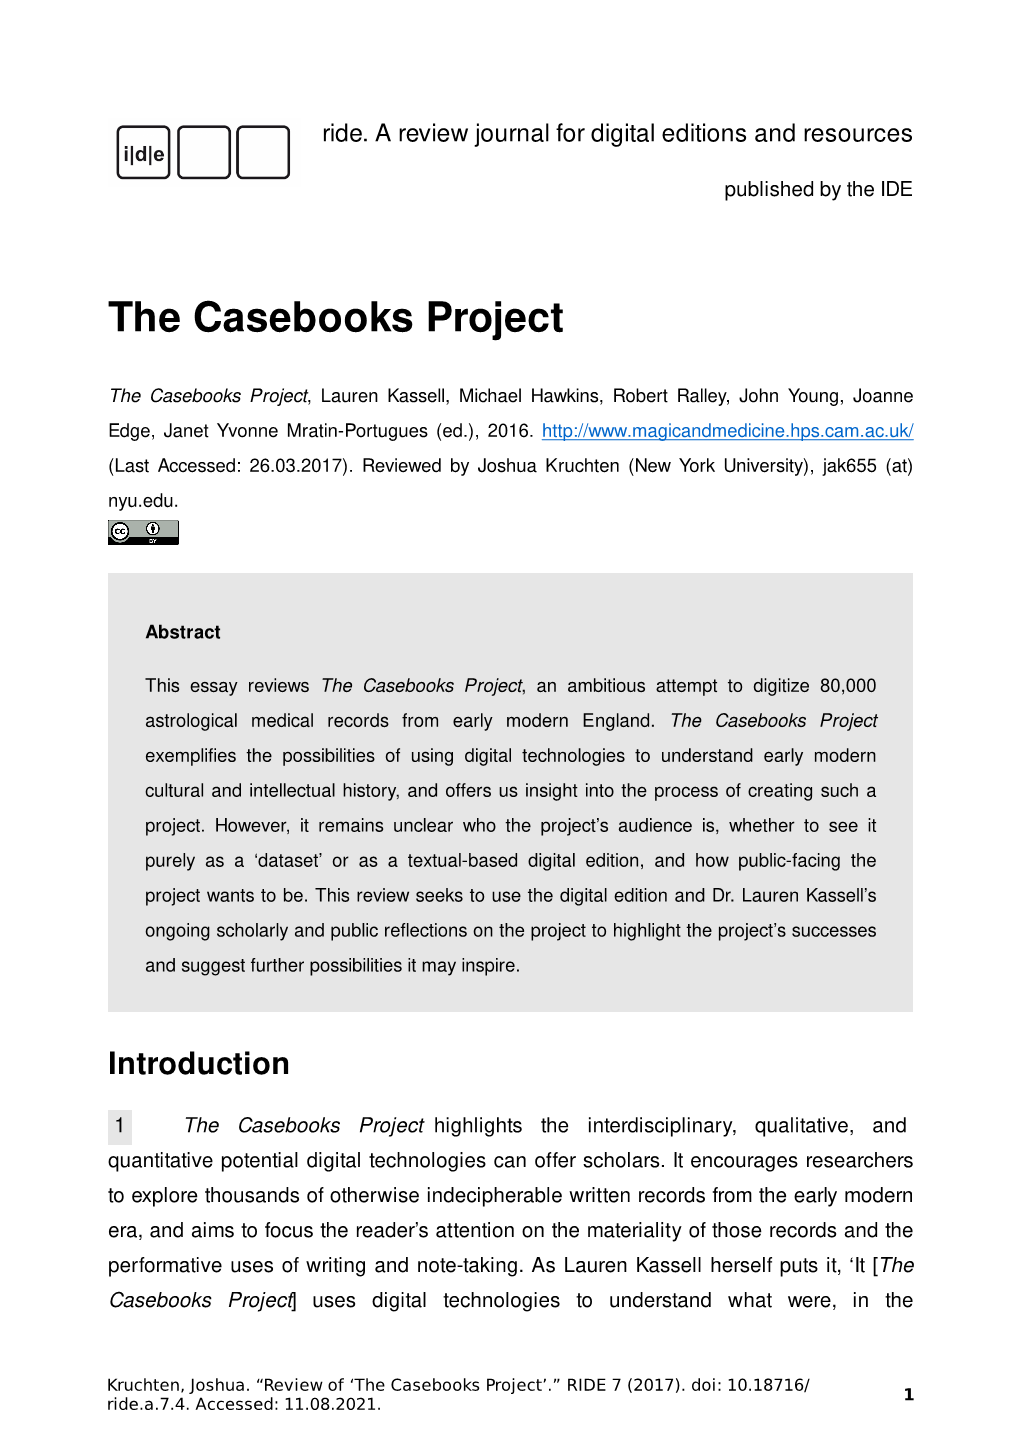 The Casebooks Project